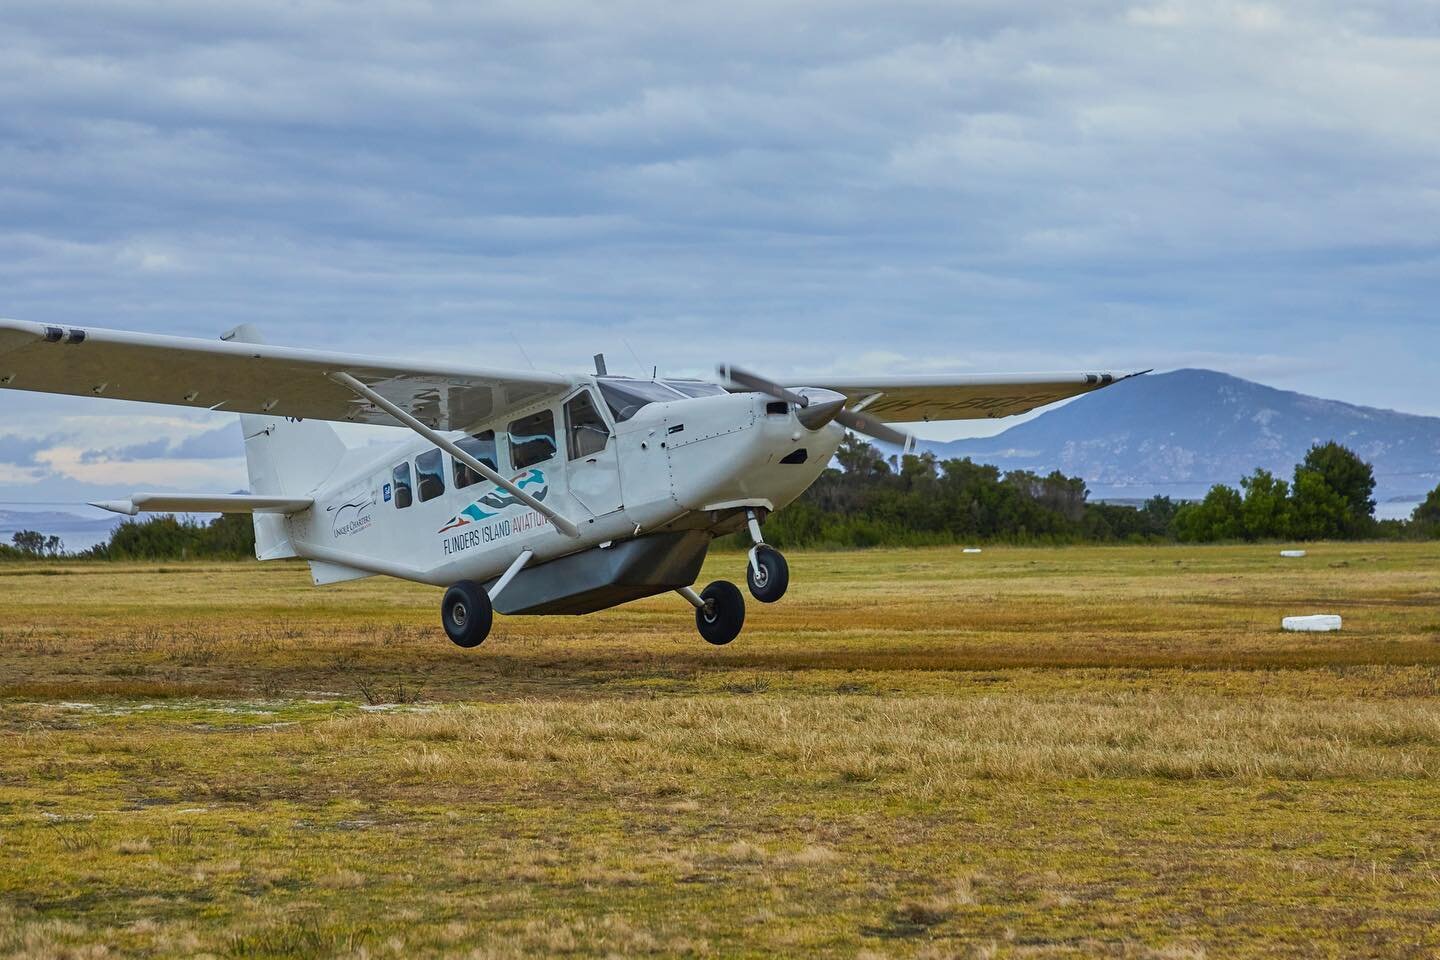 Happy Monday from Flinders Island Aviation! There&rsquo;s no better feeling than taking off on Monday morning ready for a whole week of seeing our valued customers. We hope you are as excited for your week as we are 😄☀️

#aviation #flying #flindersi